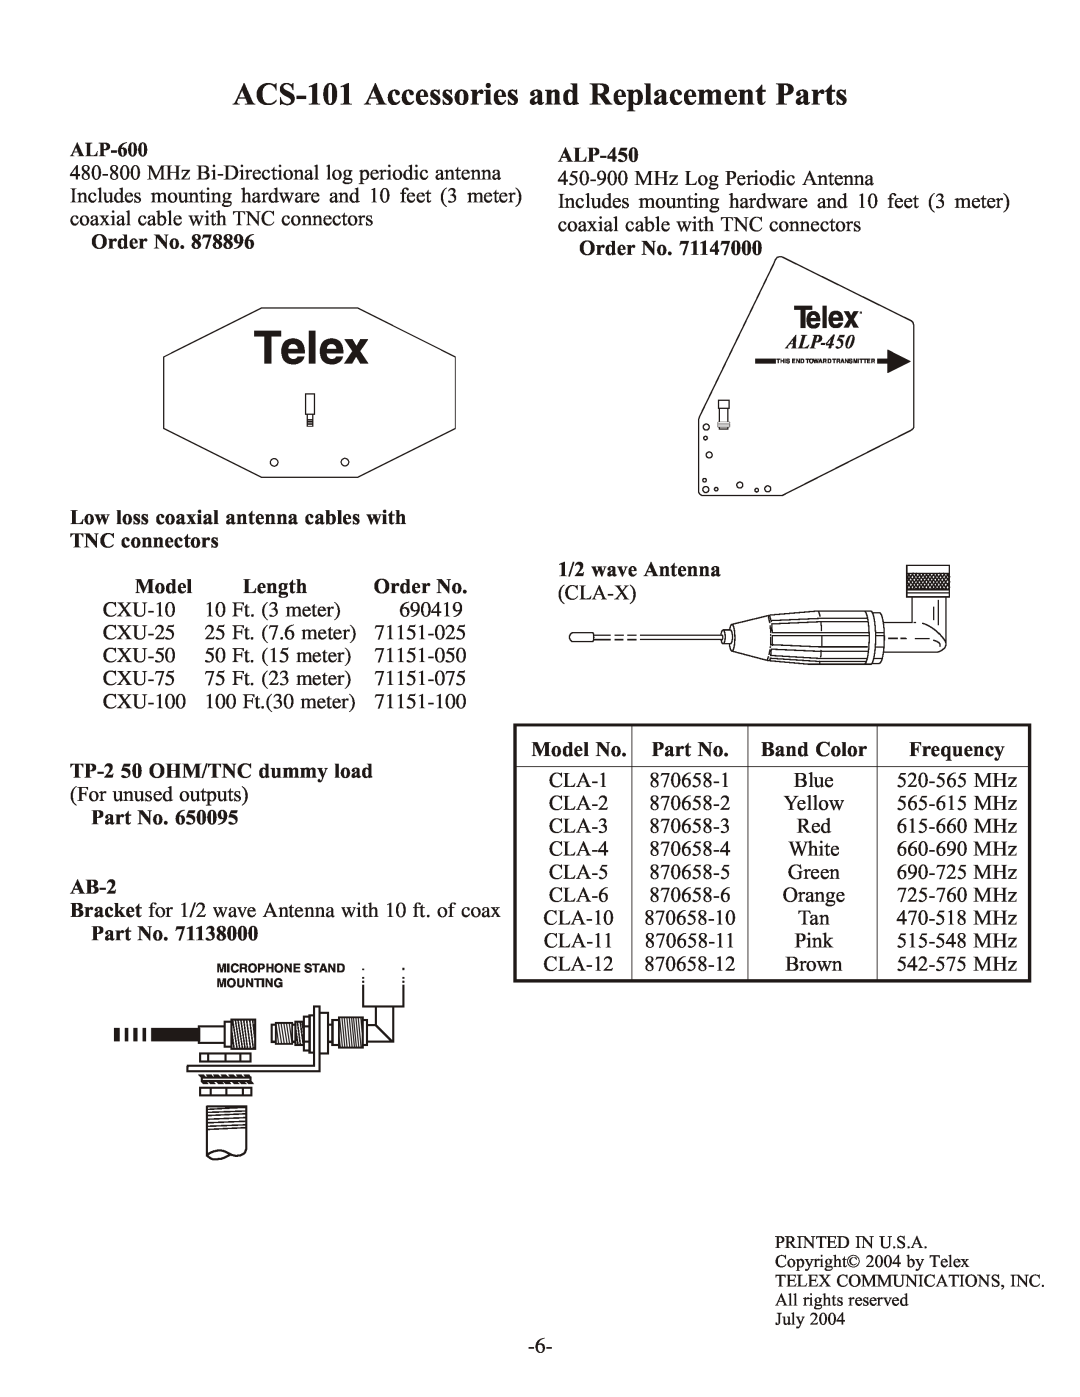 Telex instruction sheet ACS-101 Accessories and Replacement Parts, TelexR 